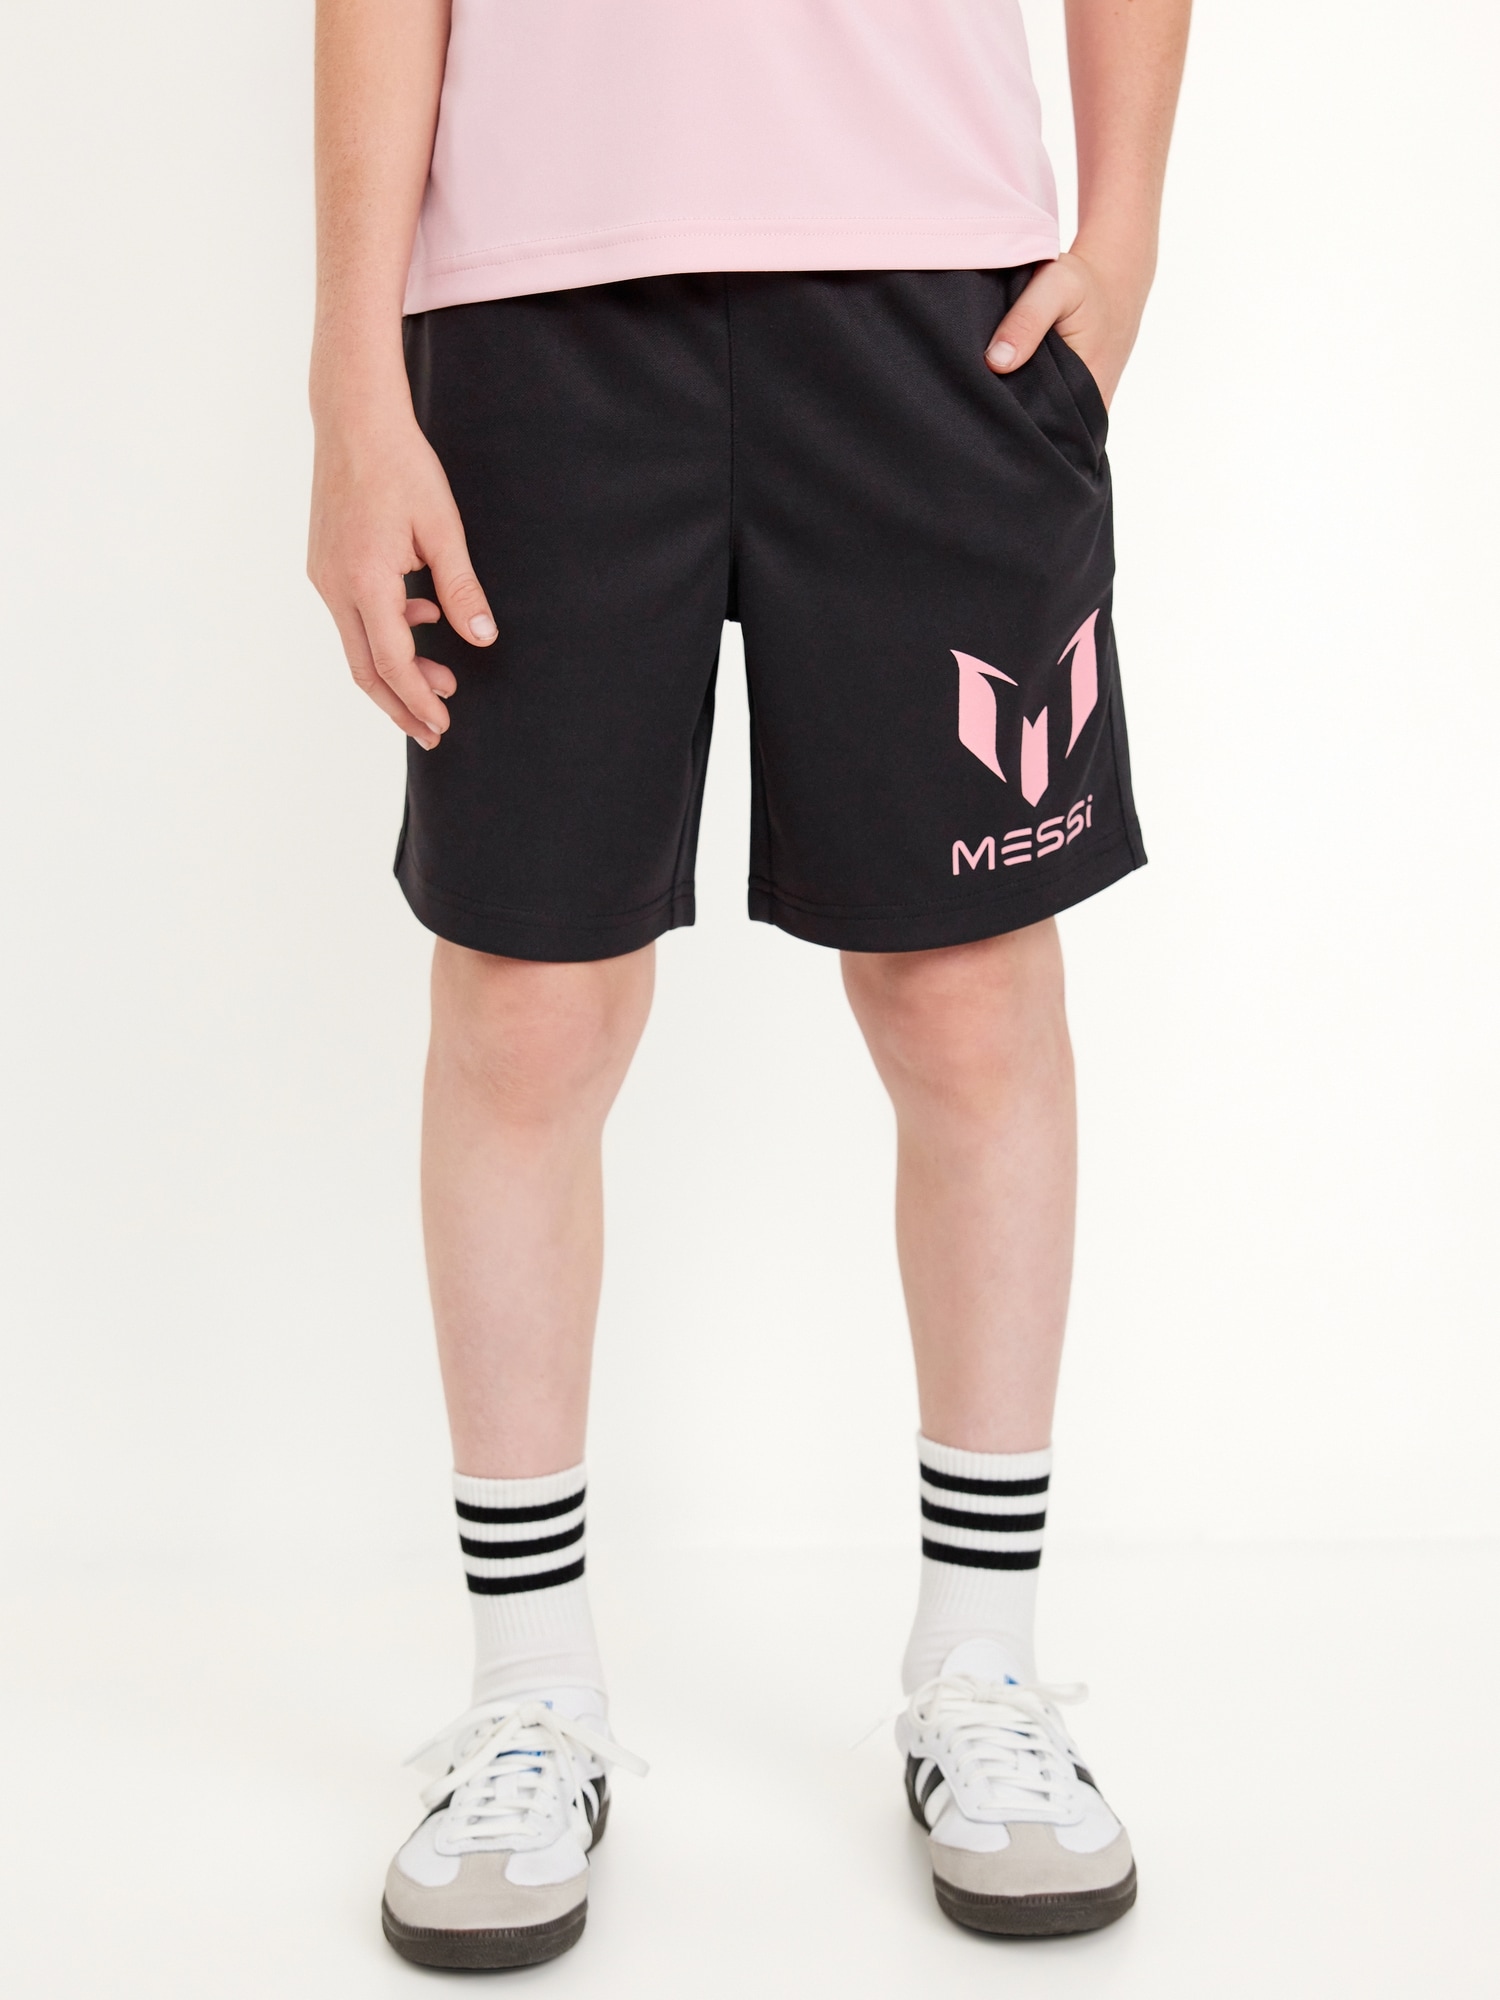 Messi Above Knee Mesh Shorts for Boys